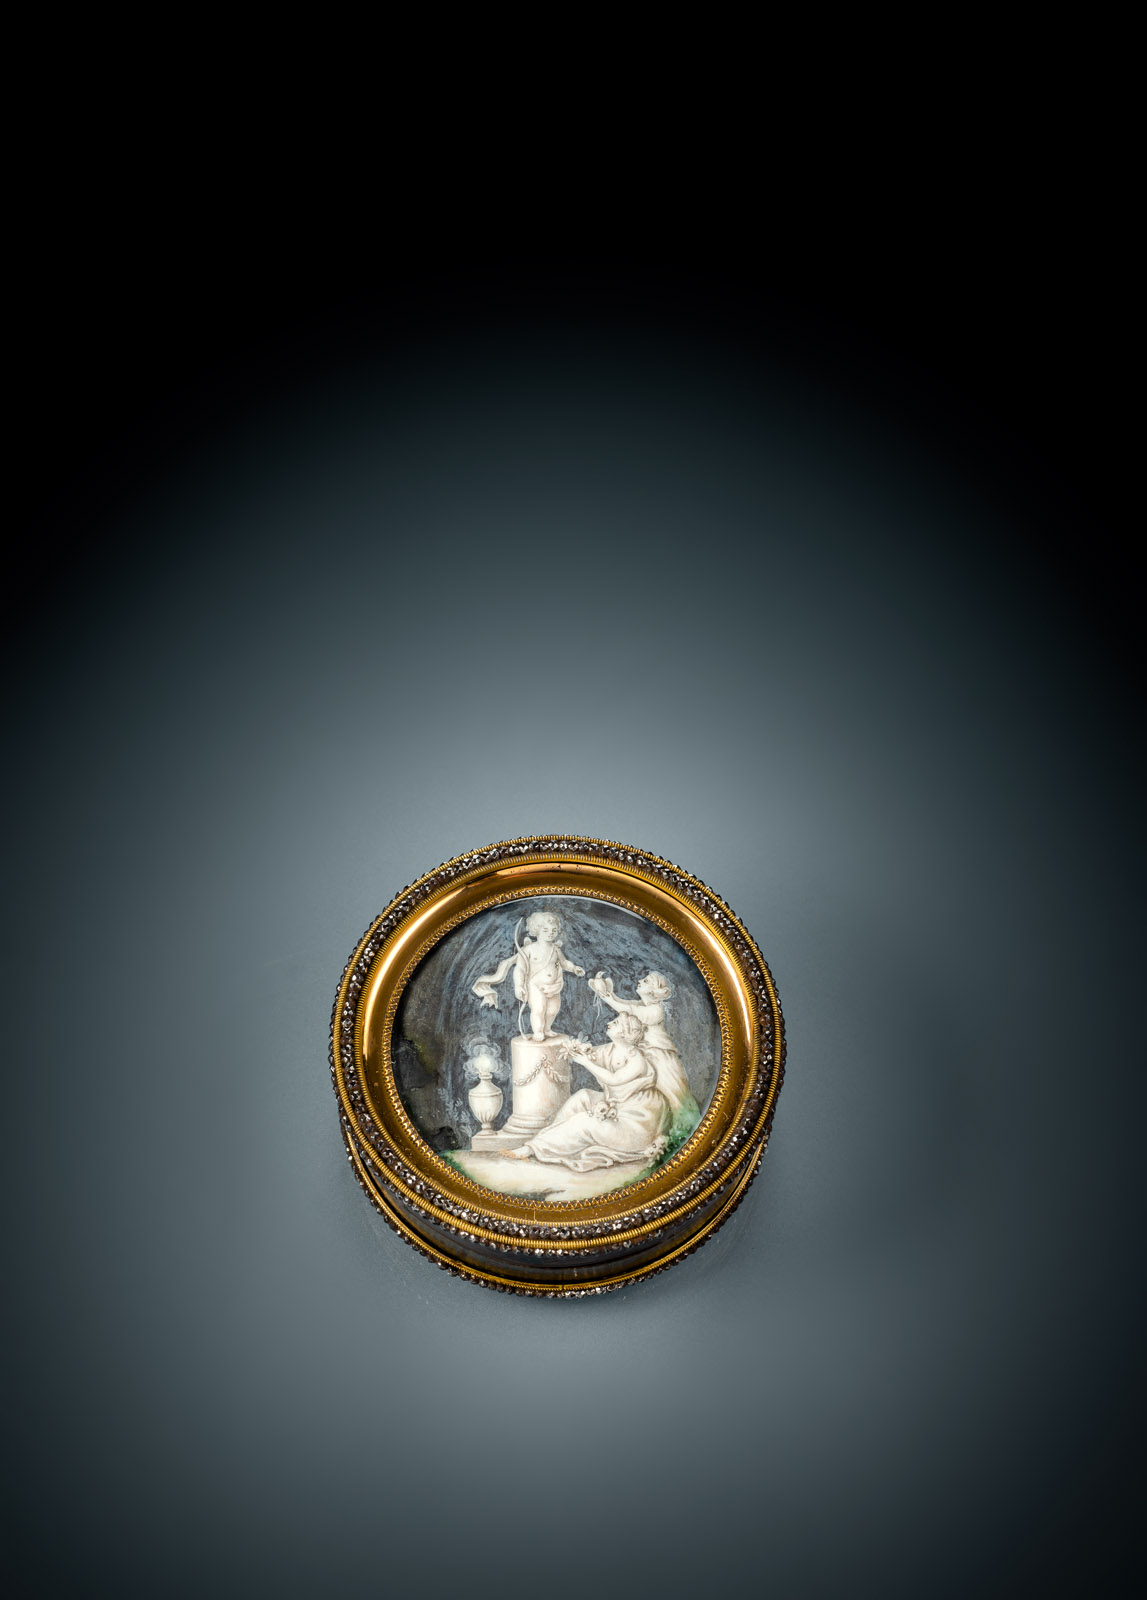 <b>A FINE FRENCH TORTOISE SHELL SNUFF BOX WITH MINIATURE BY JACQUES-JOSEPH DE GAULT (ATTR.)</b>